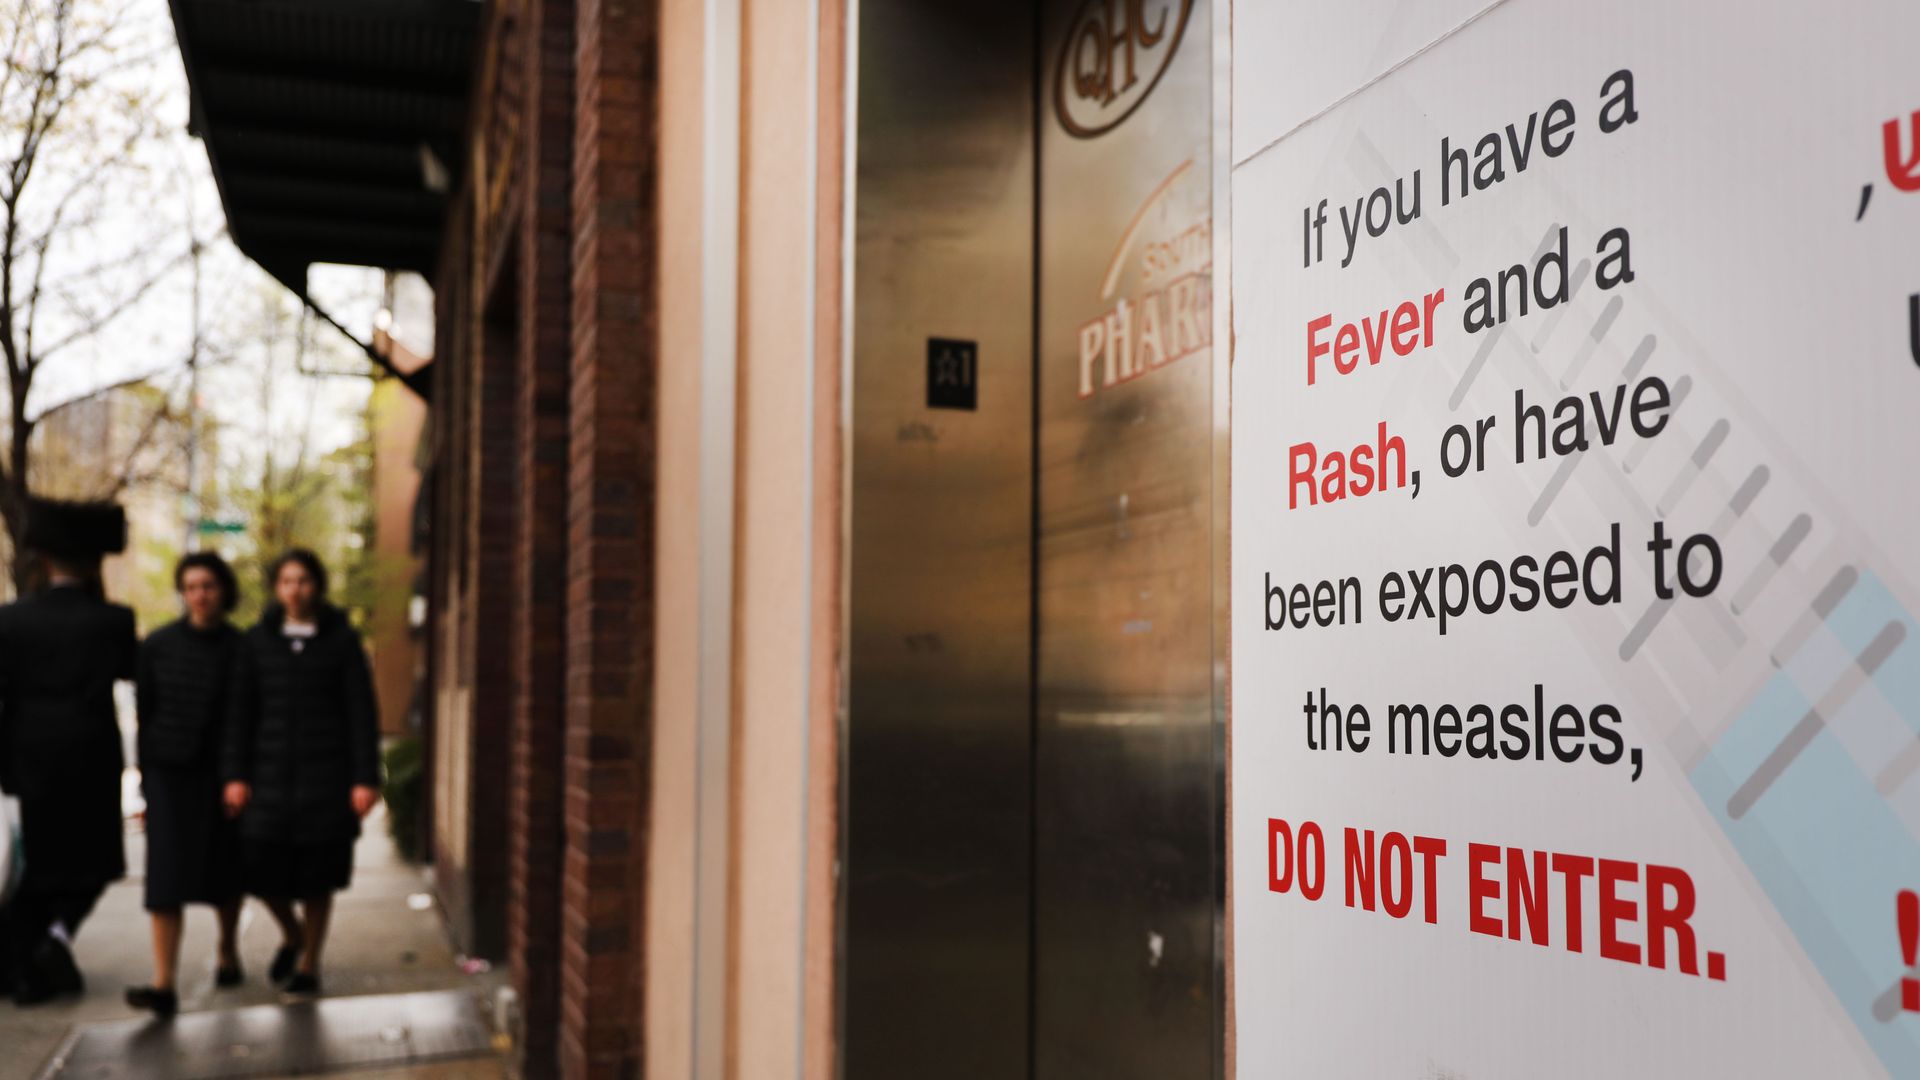 In this image, a sign posted next to an elevator reads: "If you have a fever and a rash, or have been exposed to the measles, do not enter.'